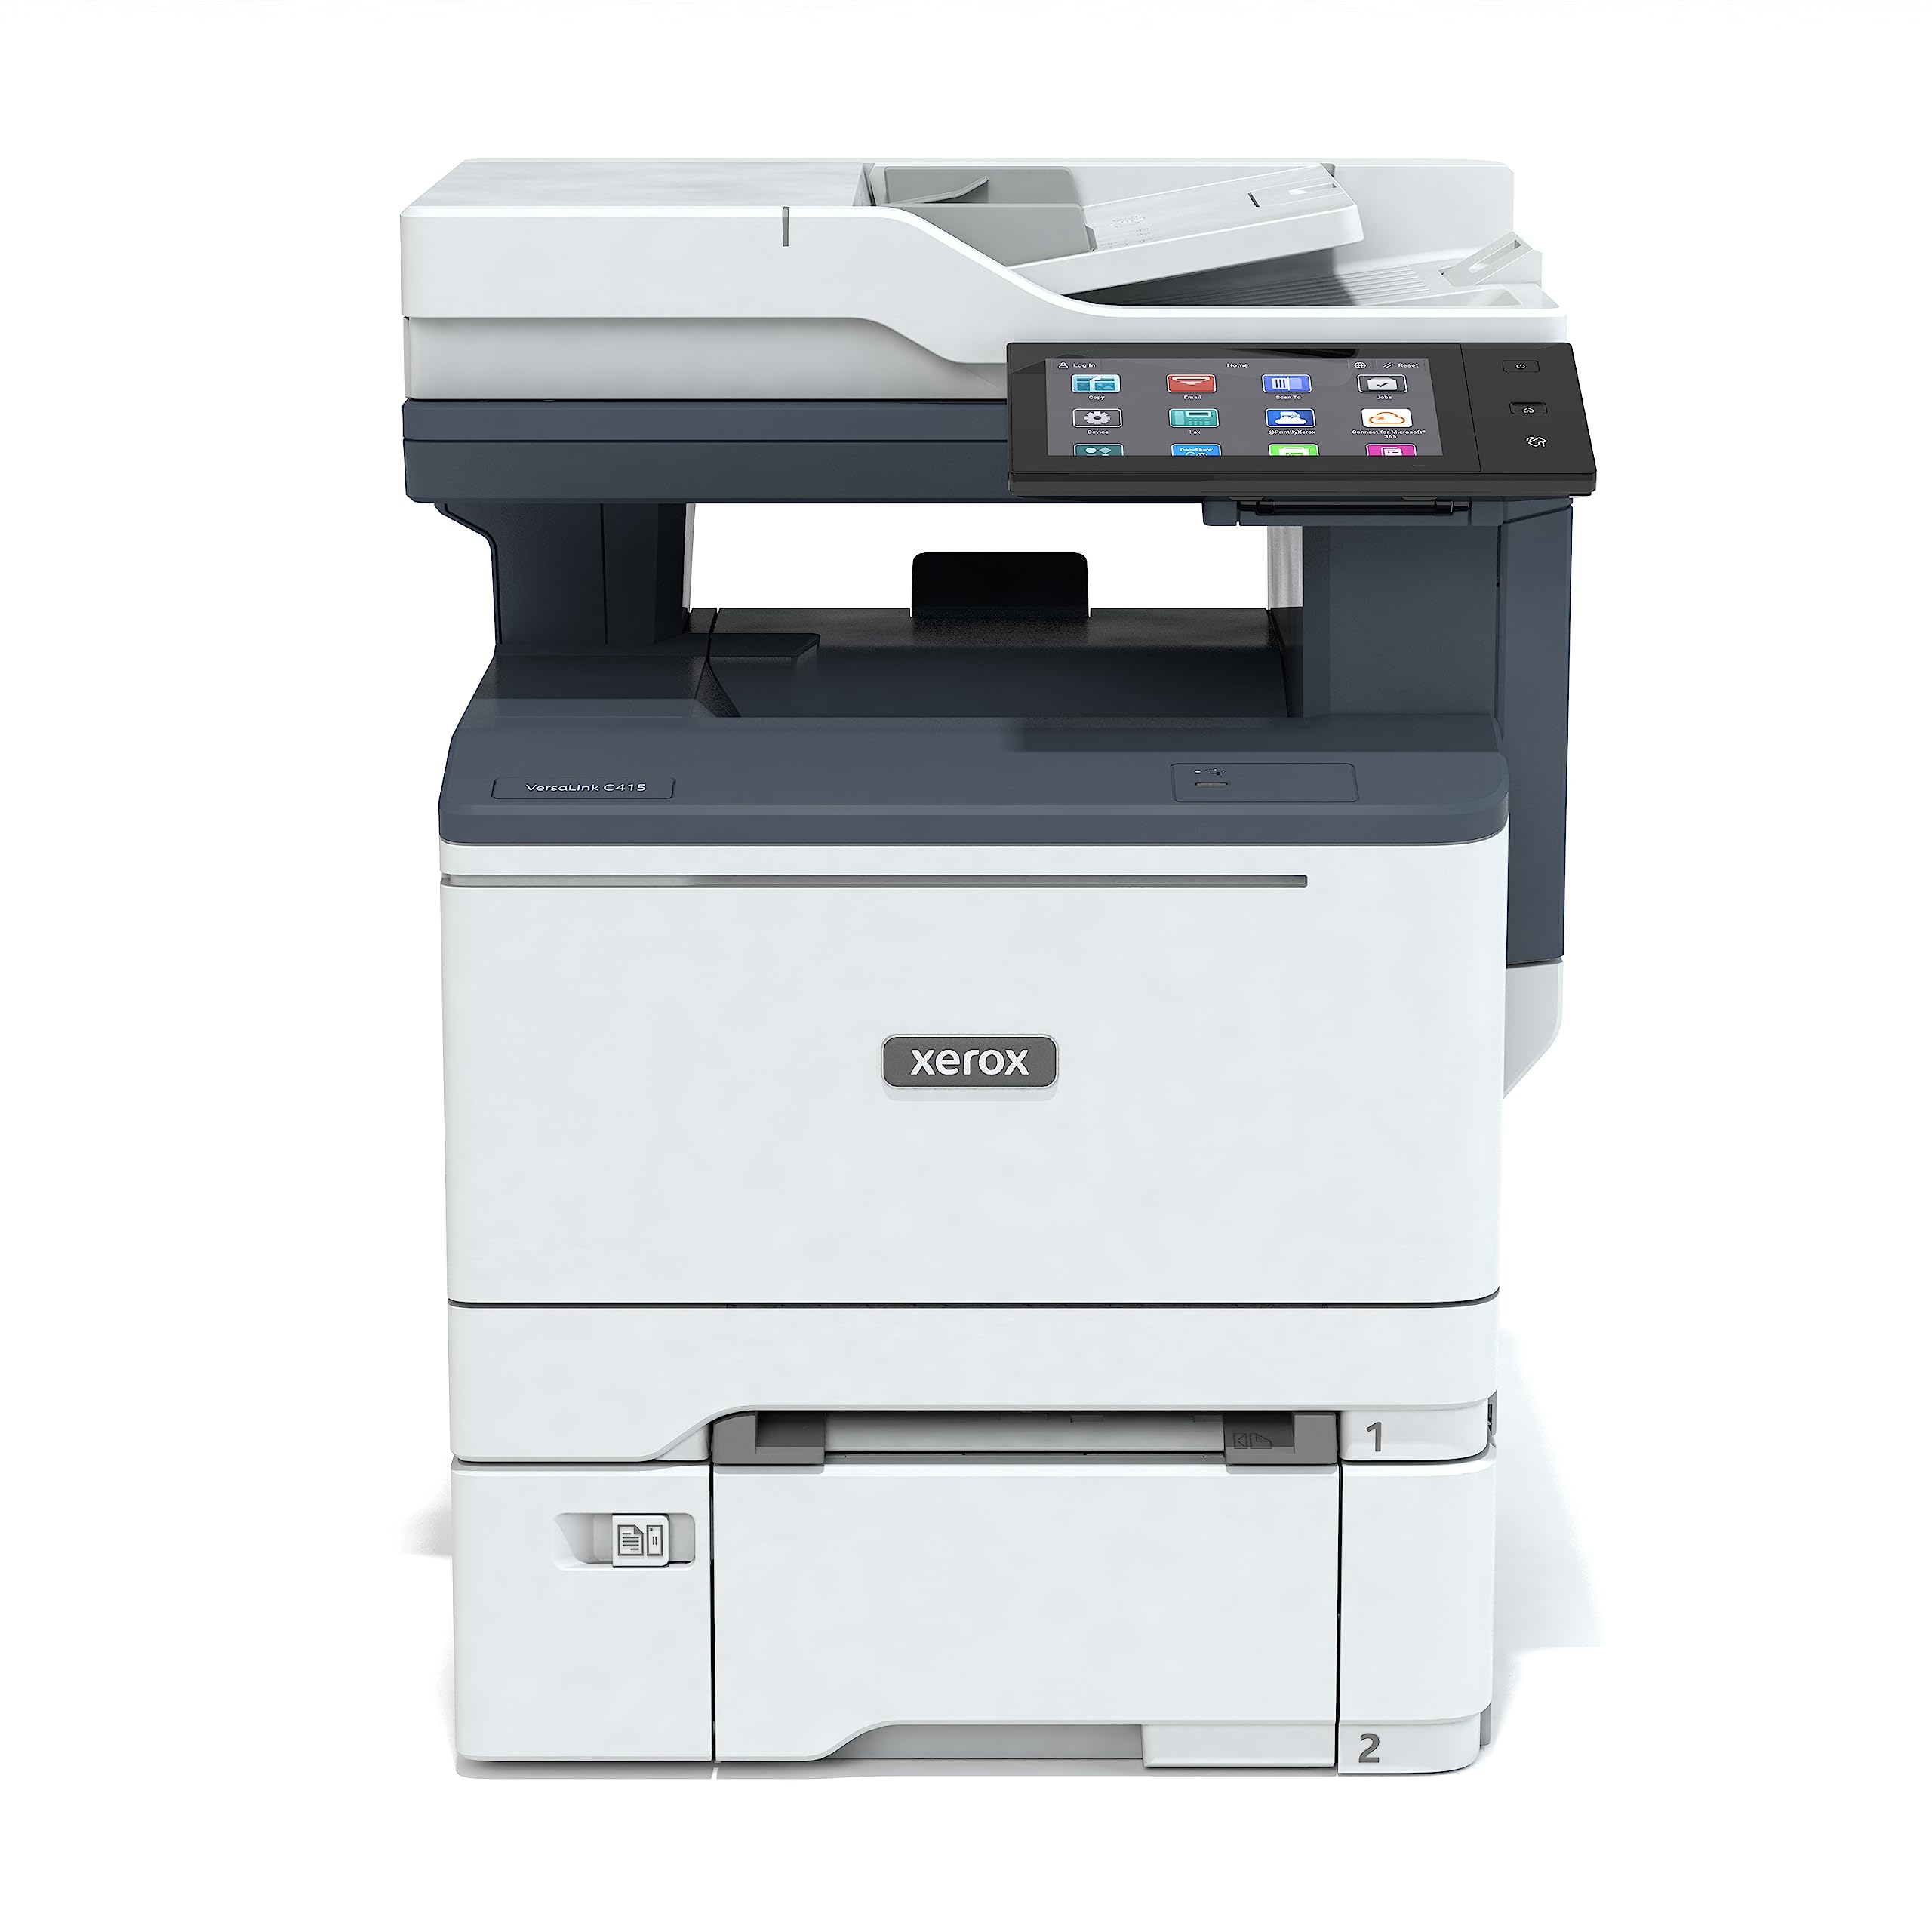 Xerox C415 Color Printer, UP to 42PPM, Duplex